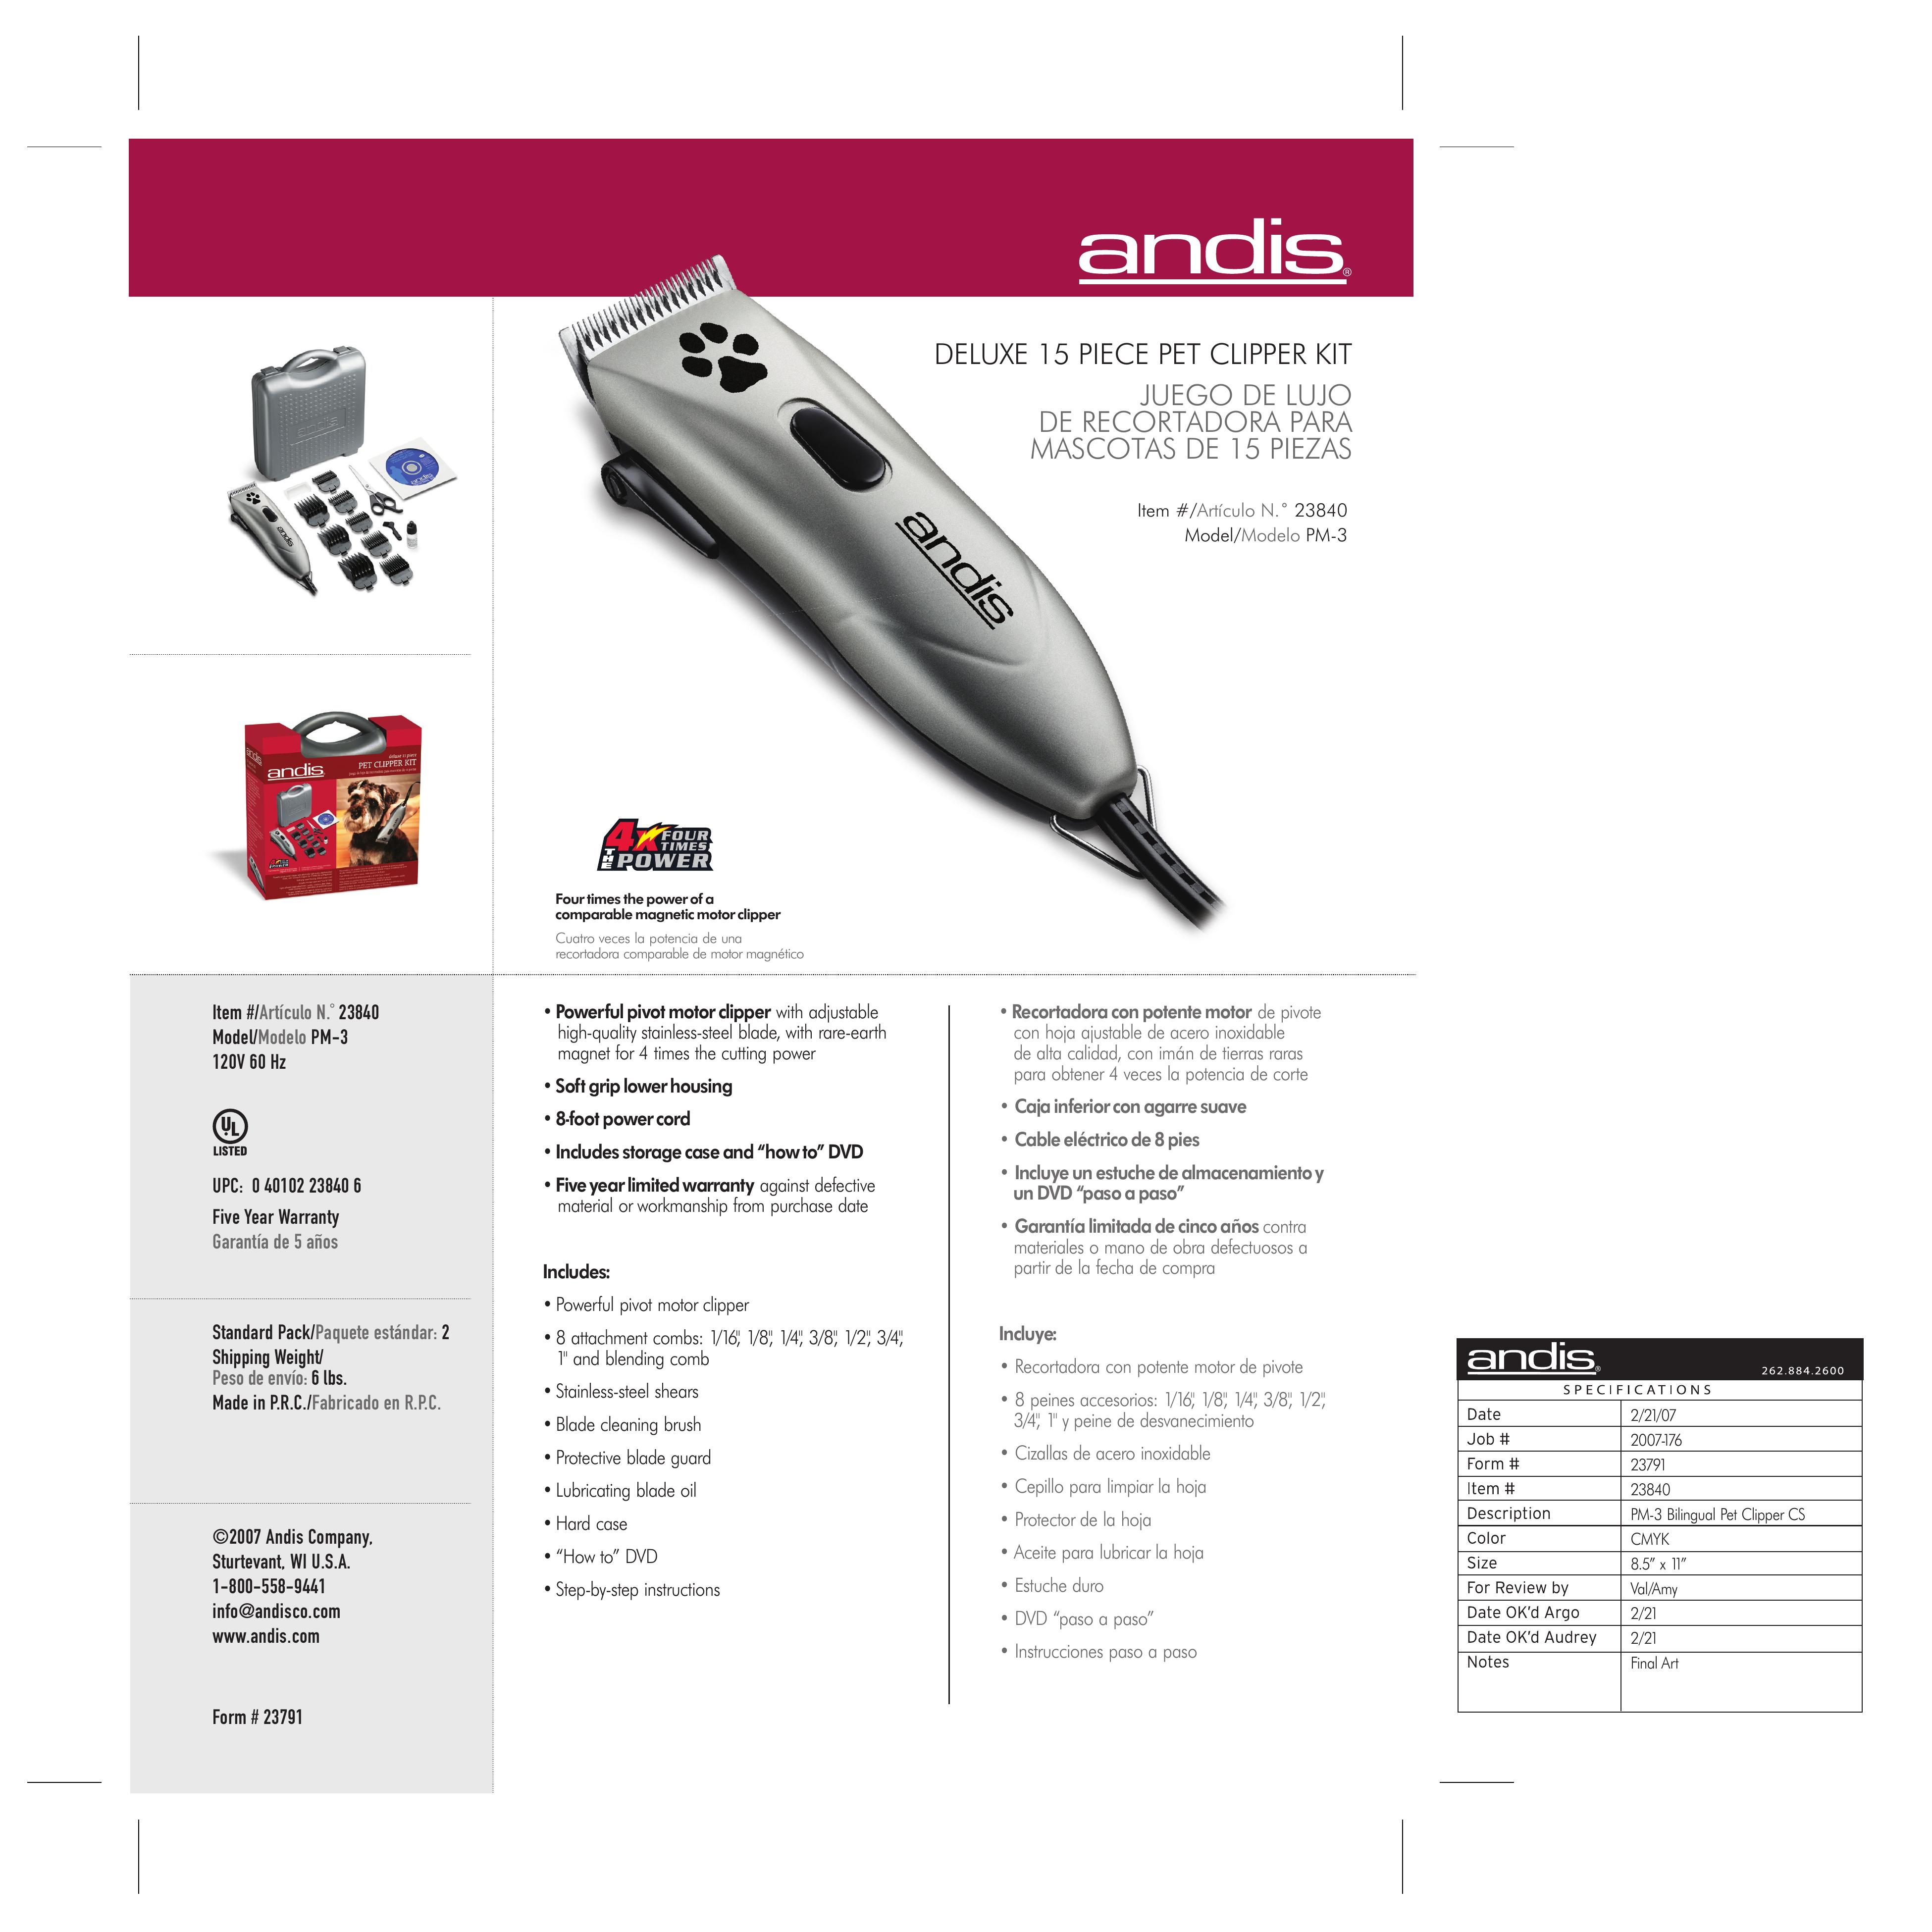 Andis Company 23840 Hair Clippers User Manual